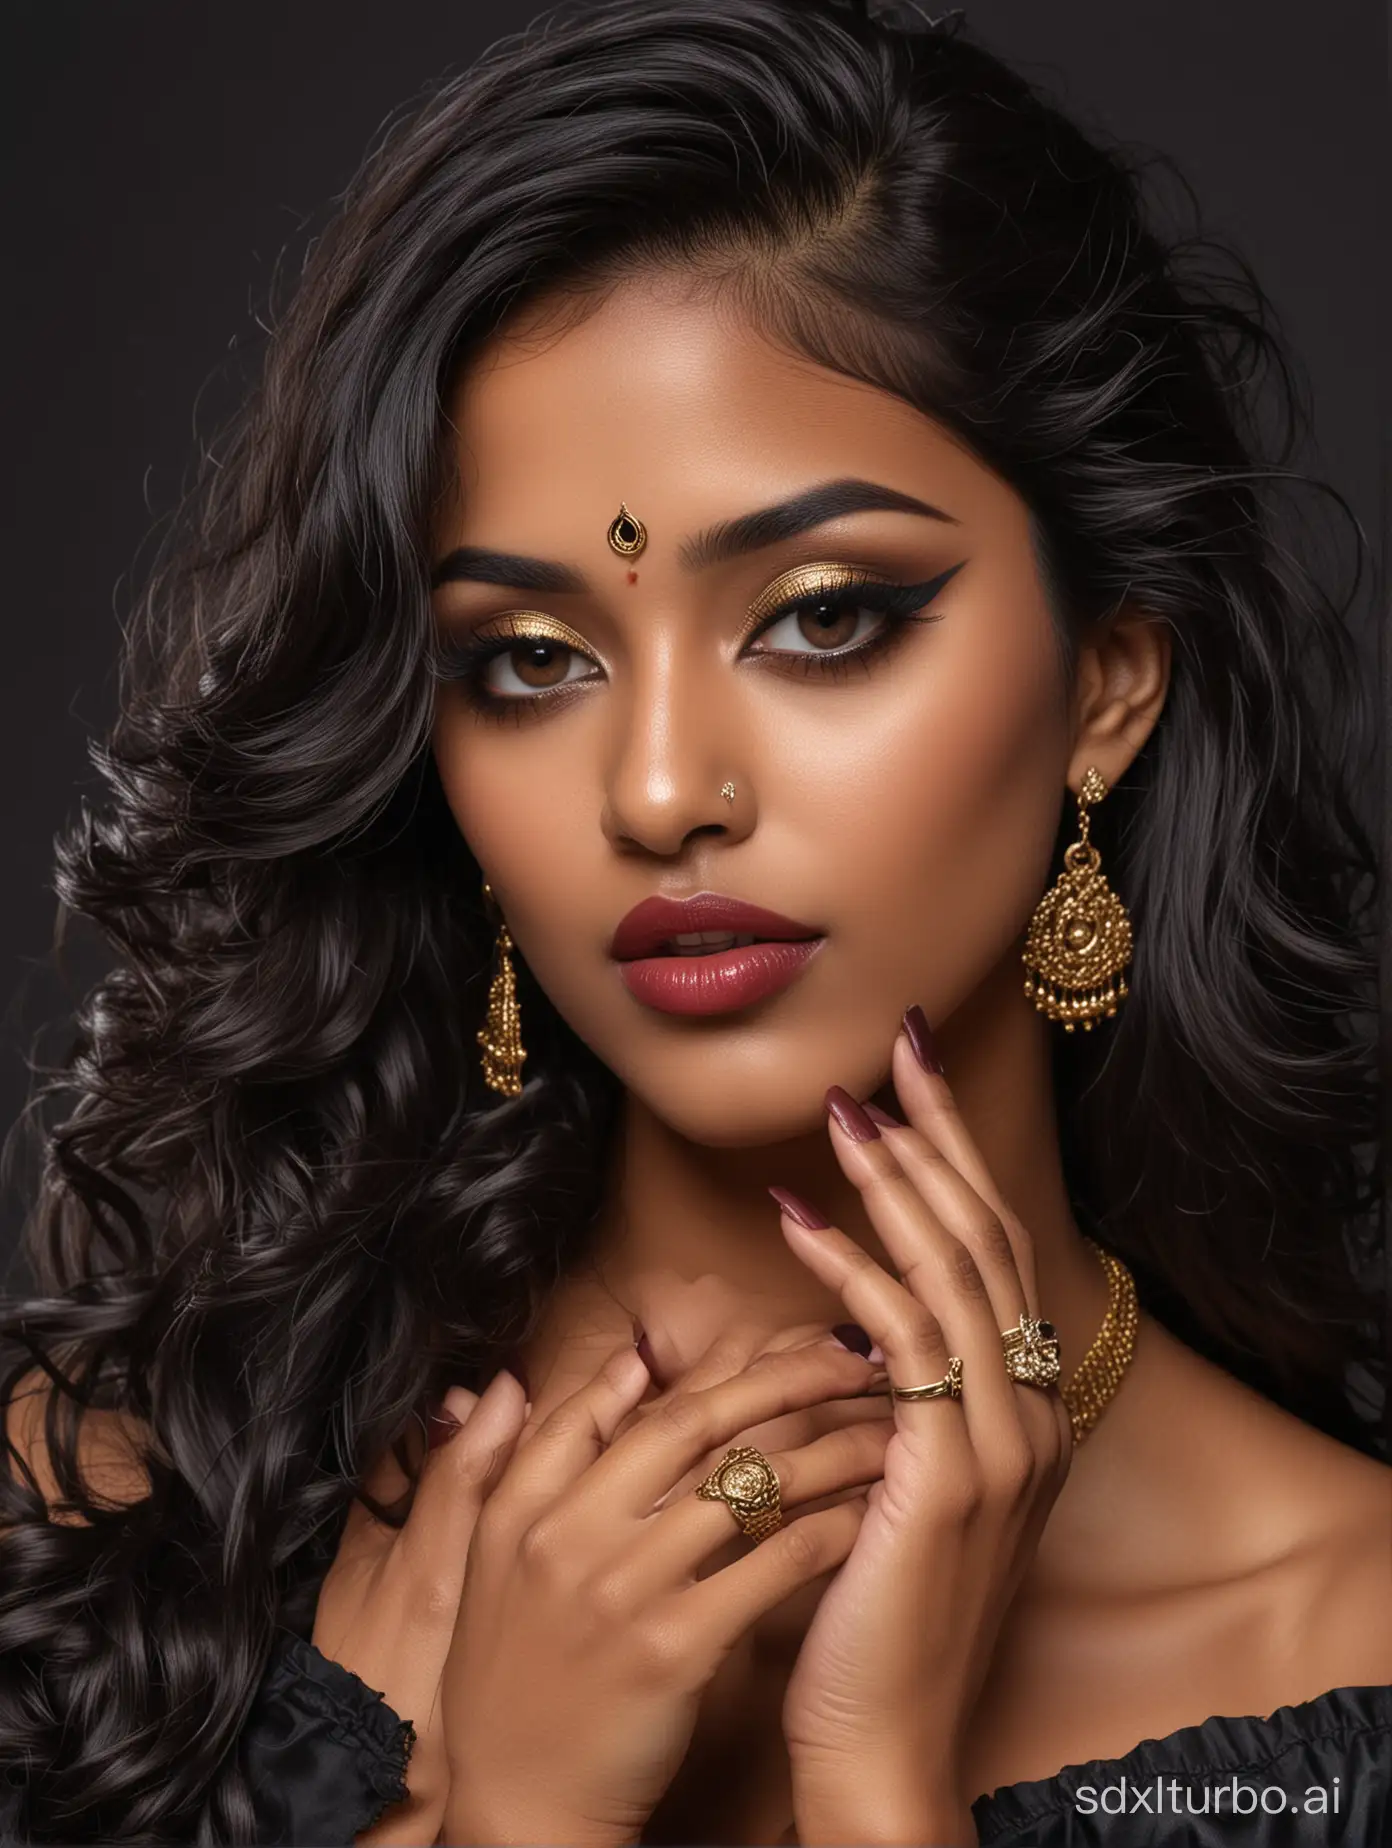 HyperRealistic-Closeup-Portrait-of-a-South-Indian-Tamil-Nun-with-Glossy-Makeup-and-Jewelry